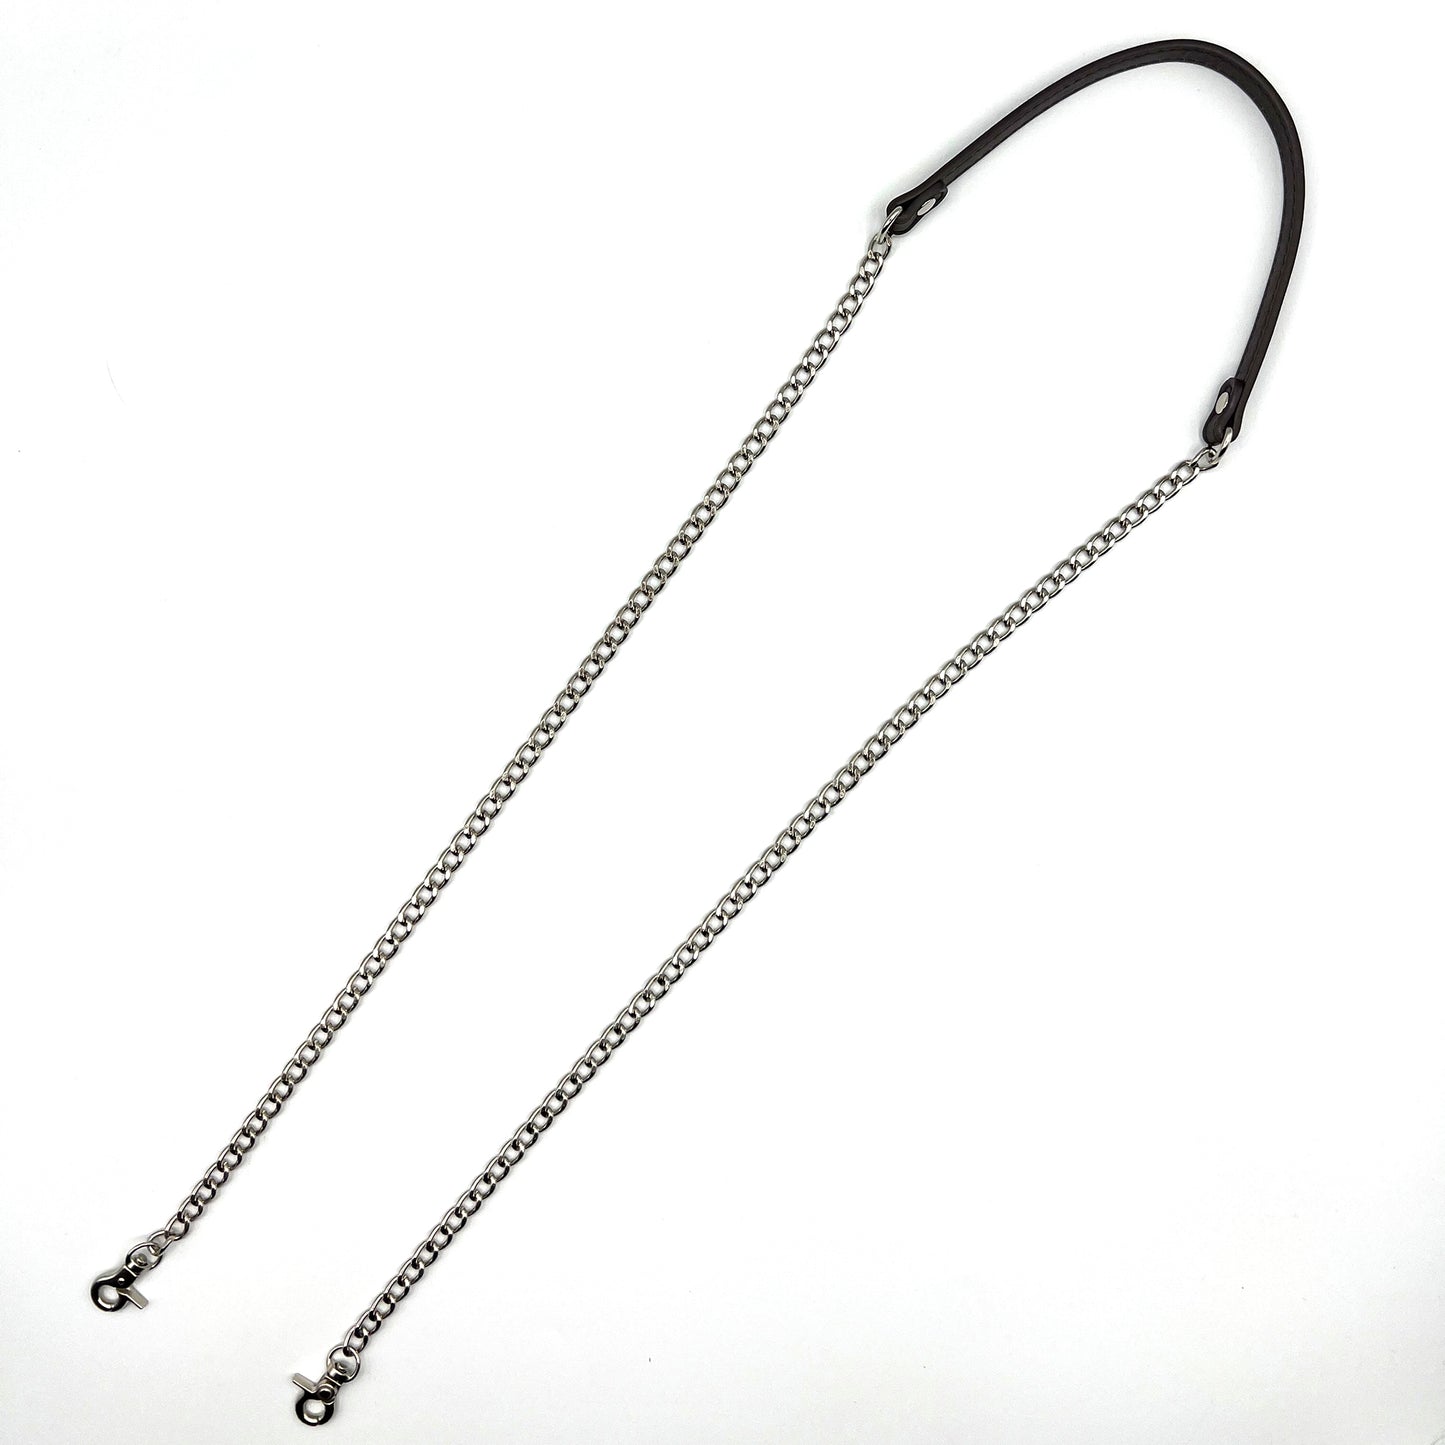 Shoulder Strap with chain and black leather